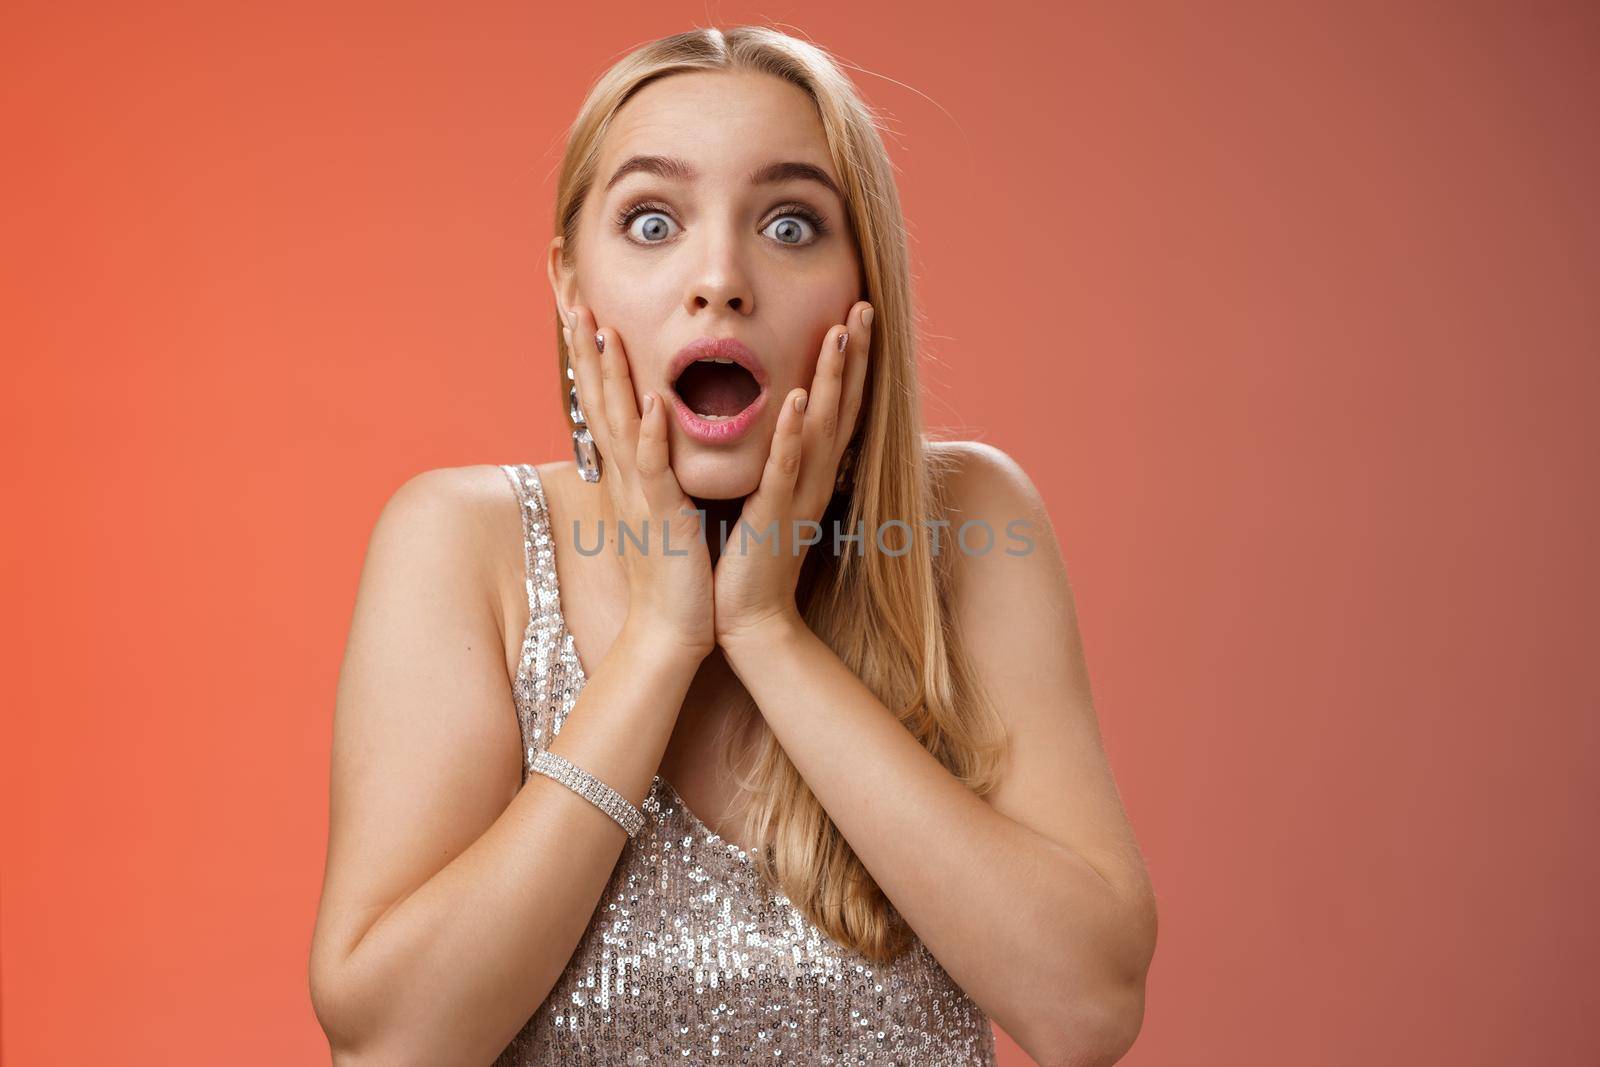 Shocked speechless concerned young stunned woman gasping screaming worried drop jaw touch cheeks widen eyes surprised nervously staring camera troubled afraid, standing red background.